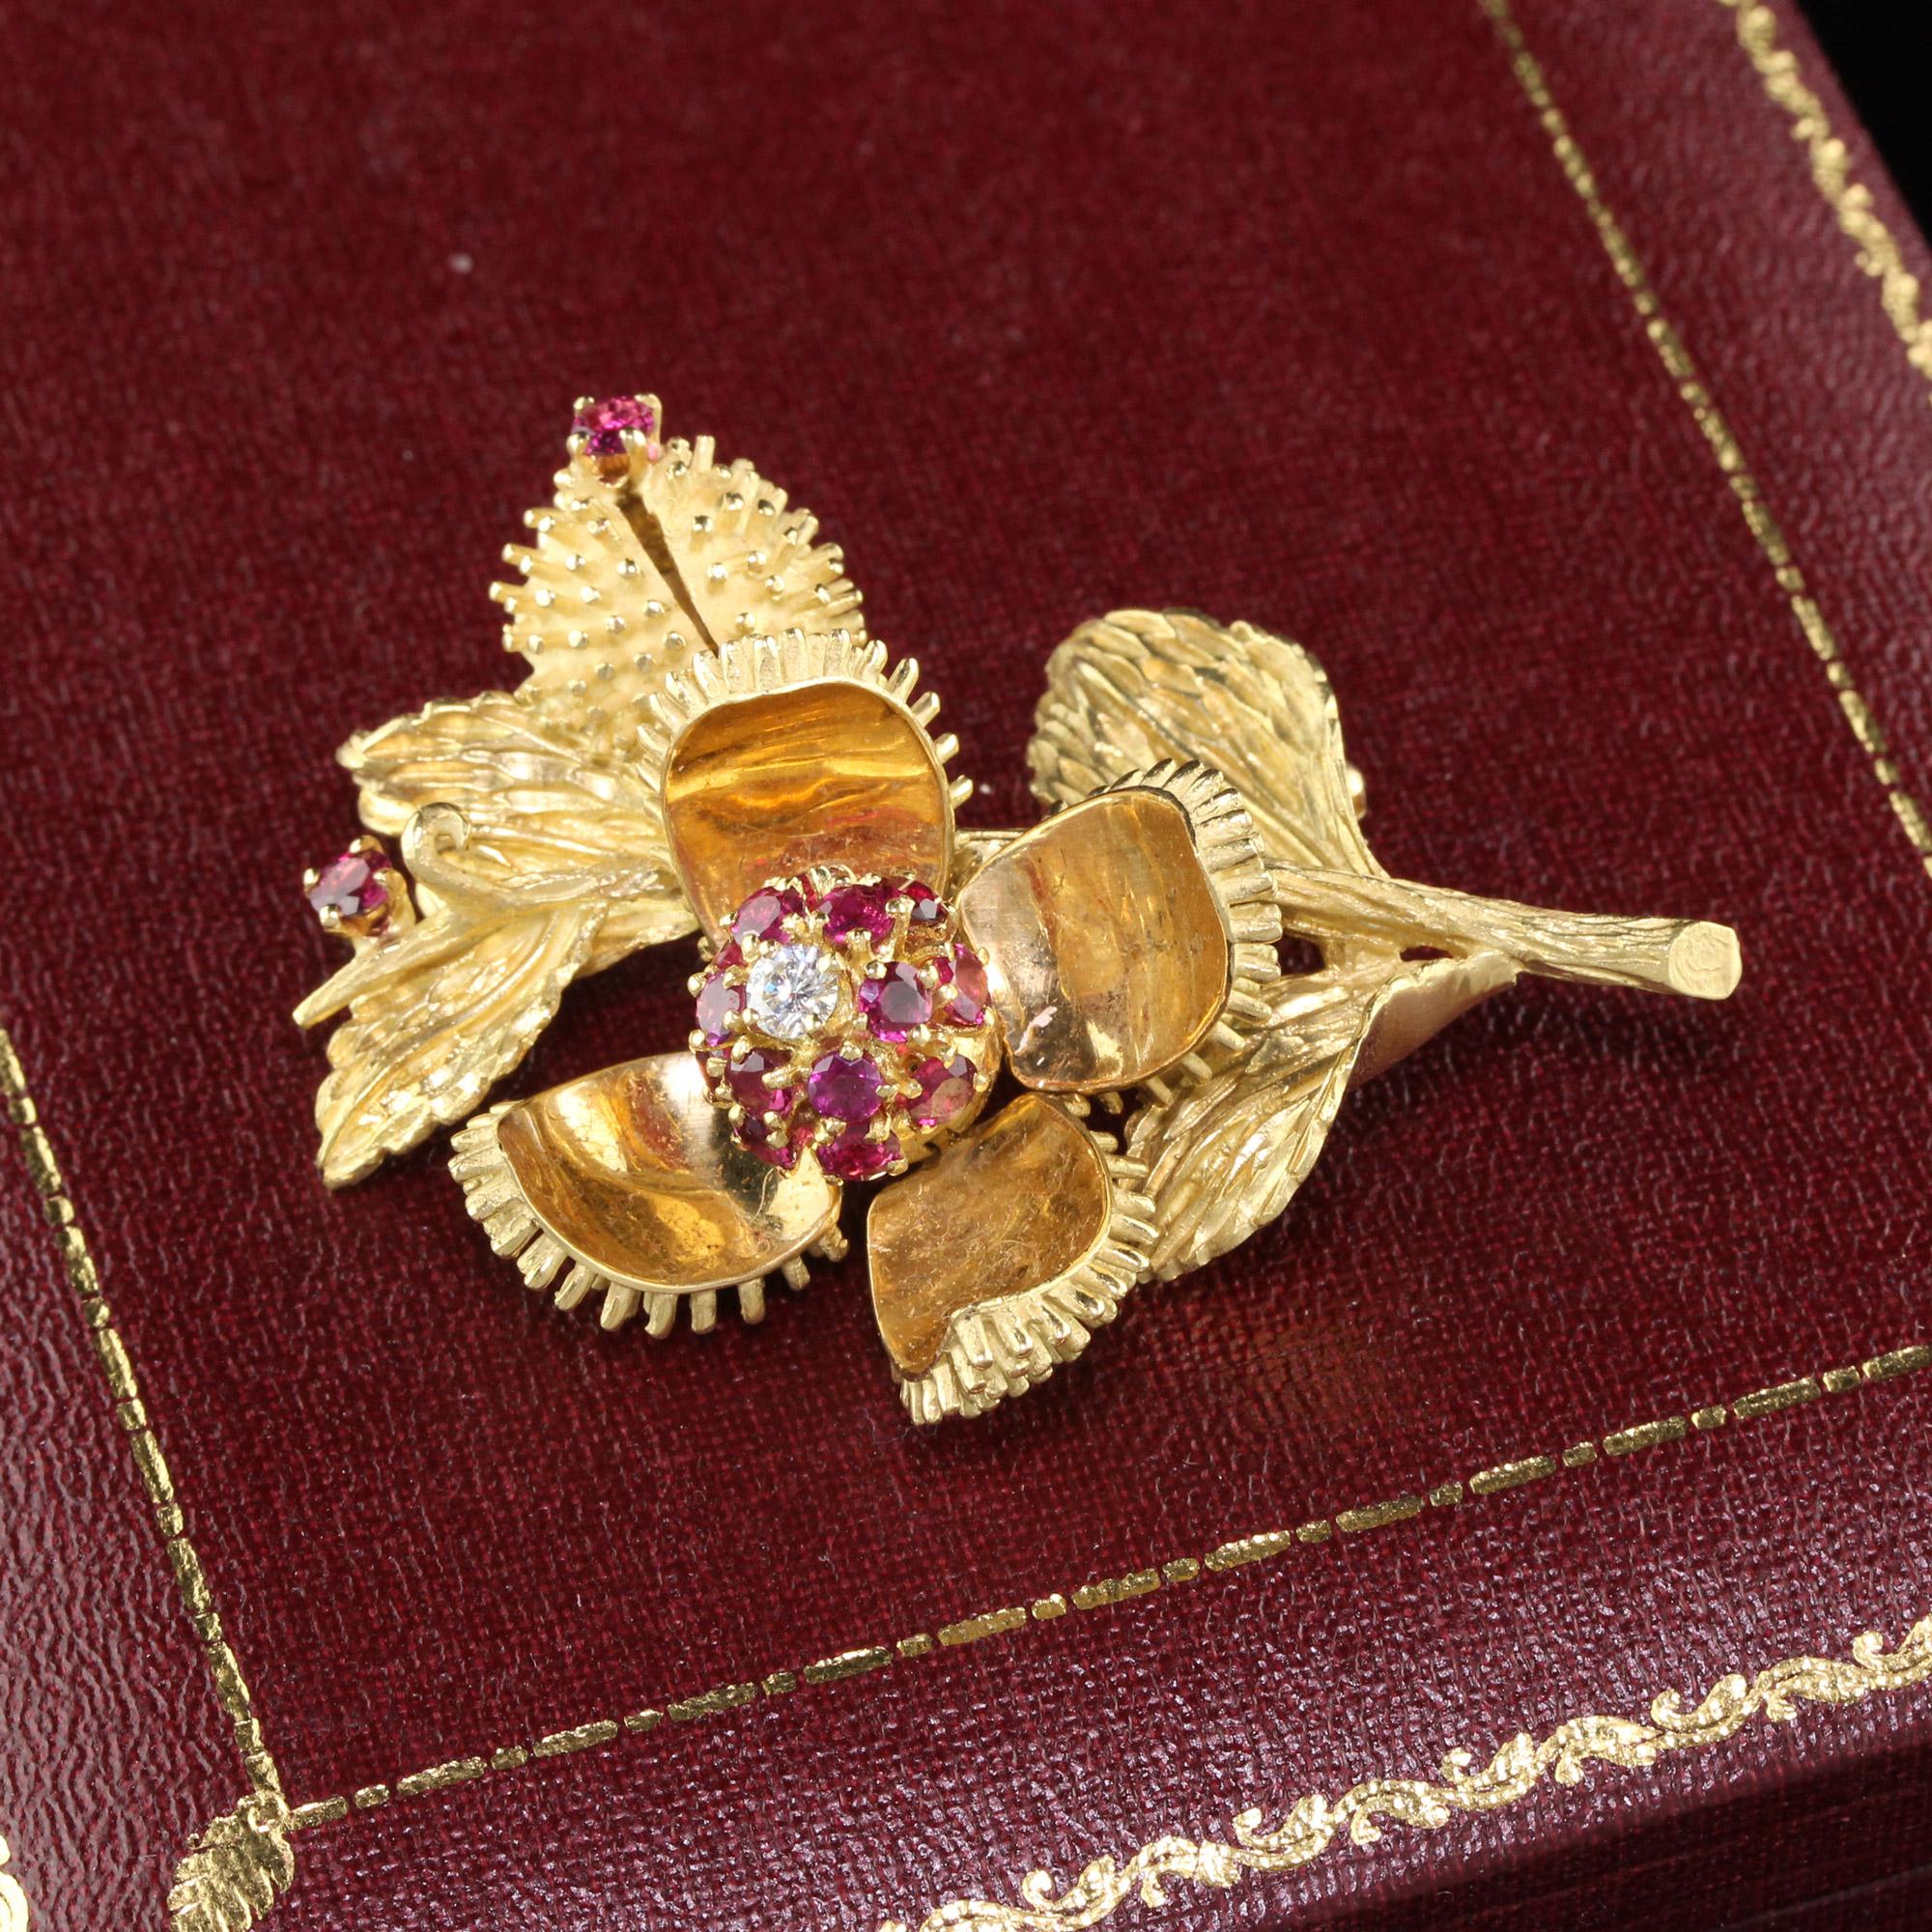 Vintage yellow gold Tiffany & Co. flower brooch with rubies & diamonds. The larger flower opens and closes manually to reveal the diamond and rubies.

Metal: 18K Yellow Gold

Weight: 29.4 Grams

Diamond Weight: Approximately 0.15 cts 

Diamond